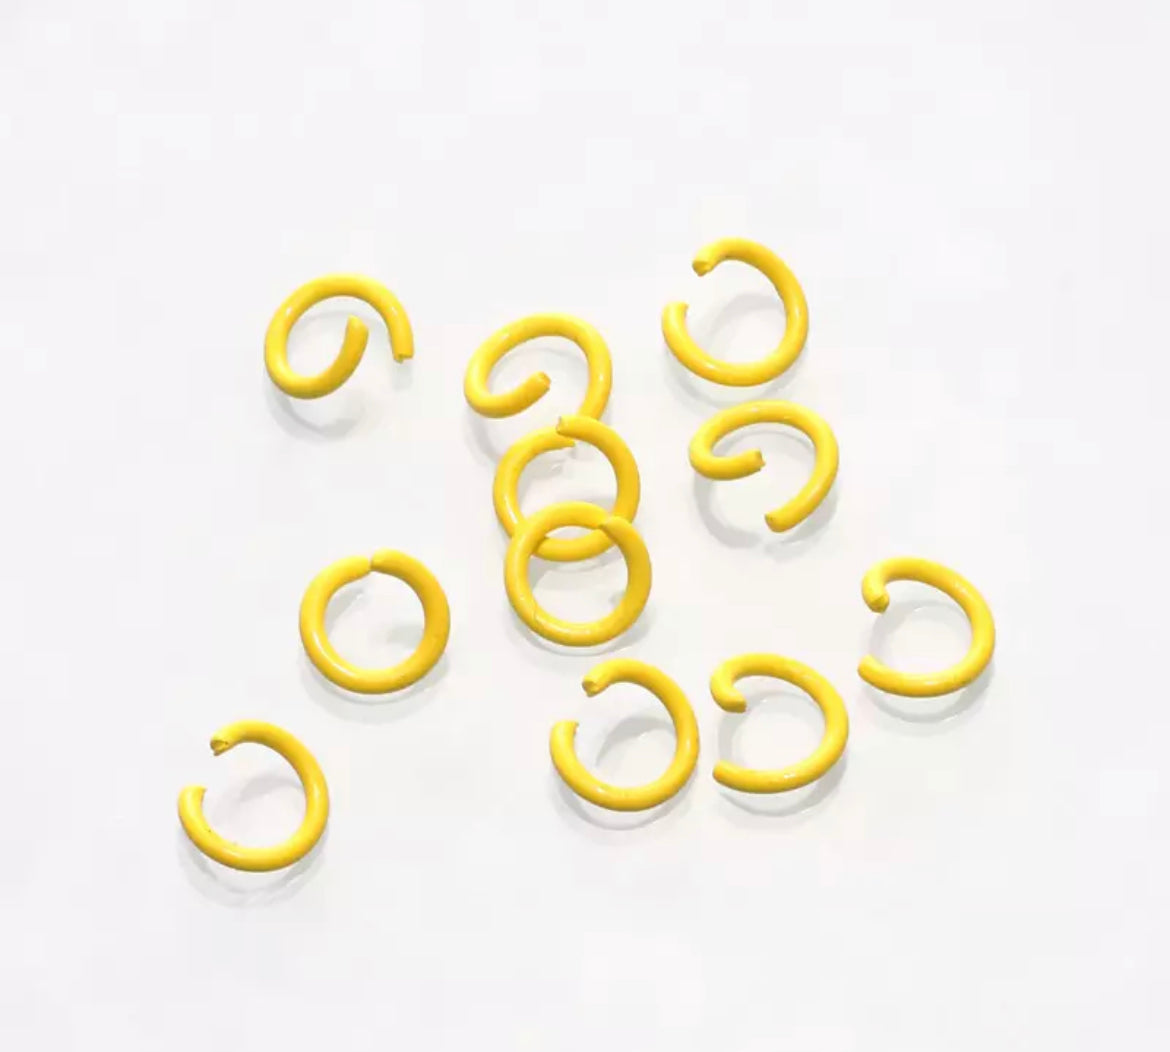 8mm coloured Jump rings - Yellow x 50 pieces